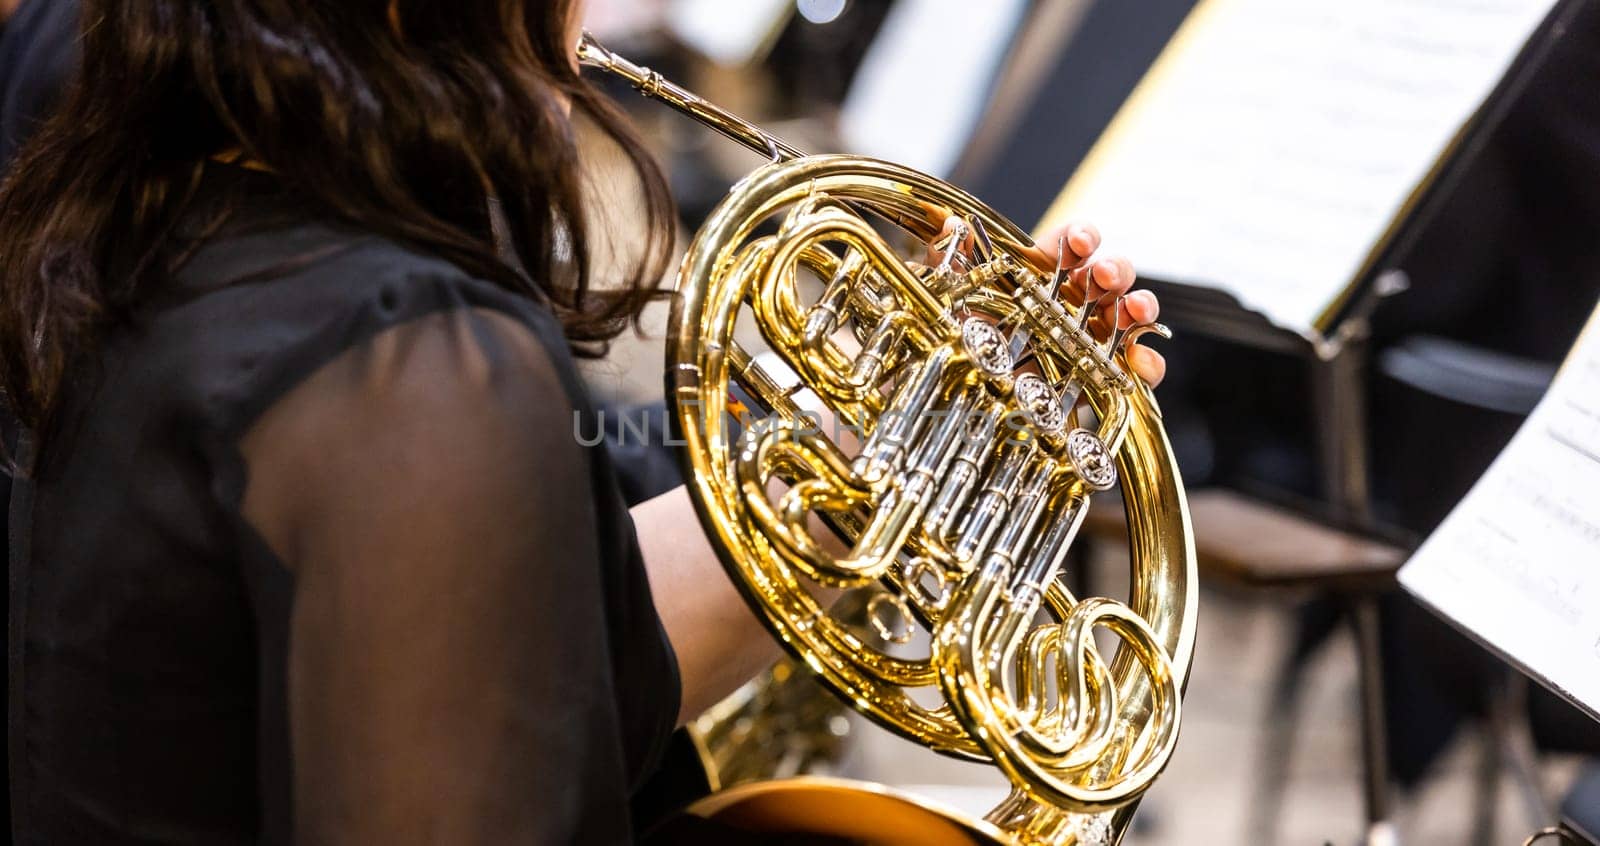 Philharmonic orchestra, musician playing on the french horn during a concert, cultural event